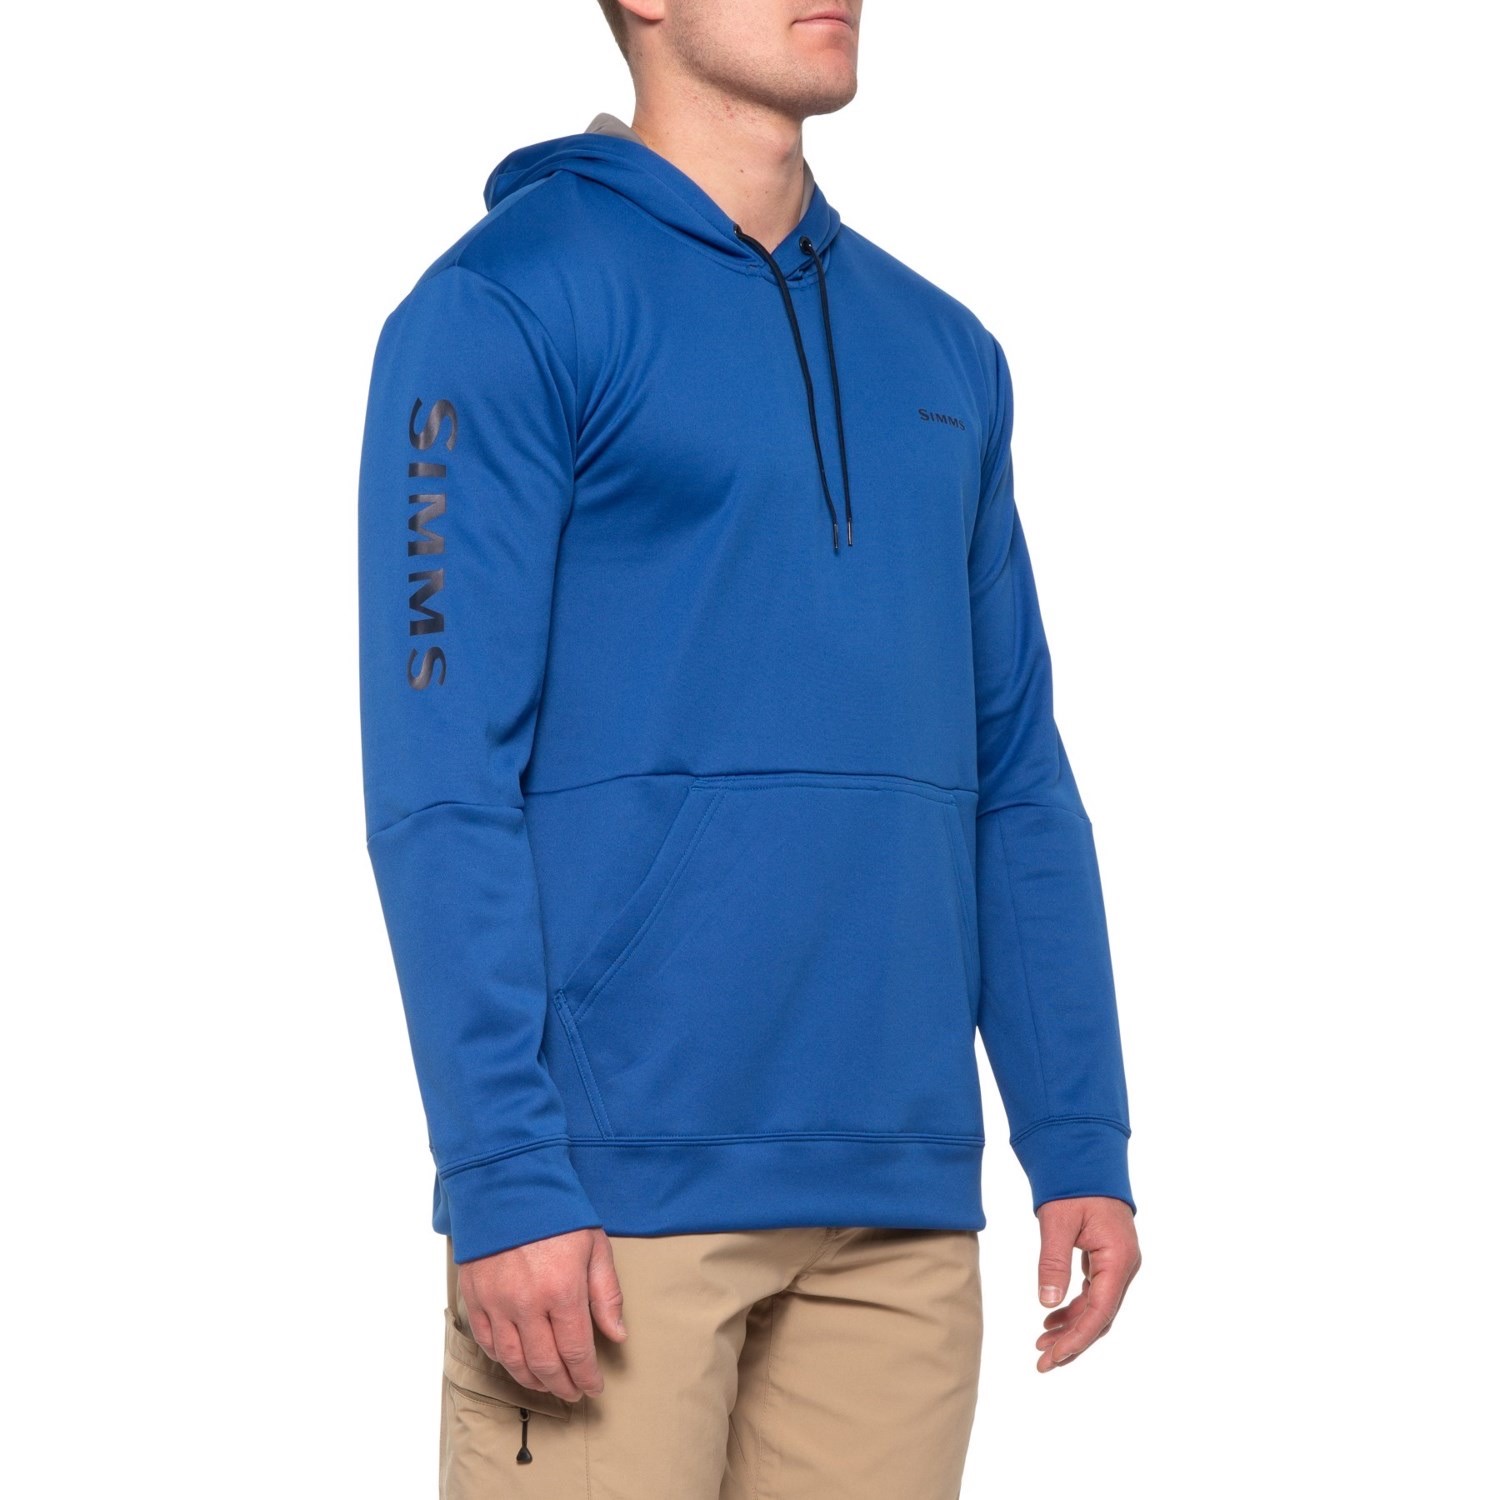 Simms M's Challenger Hoody - Rich Blue - Small